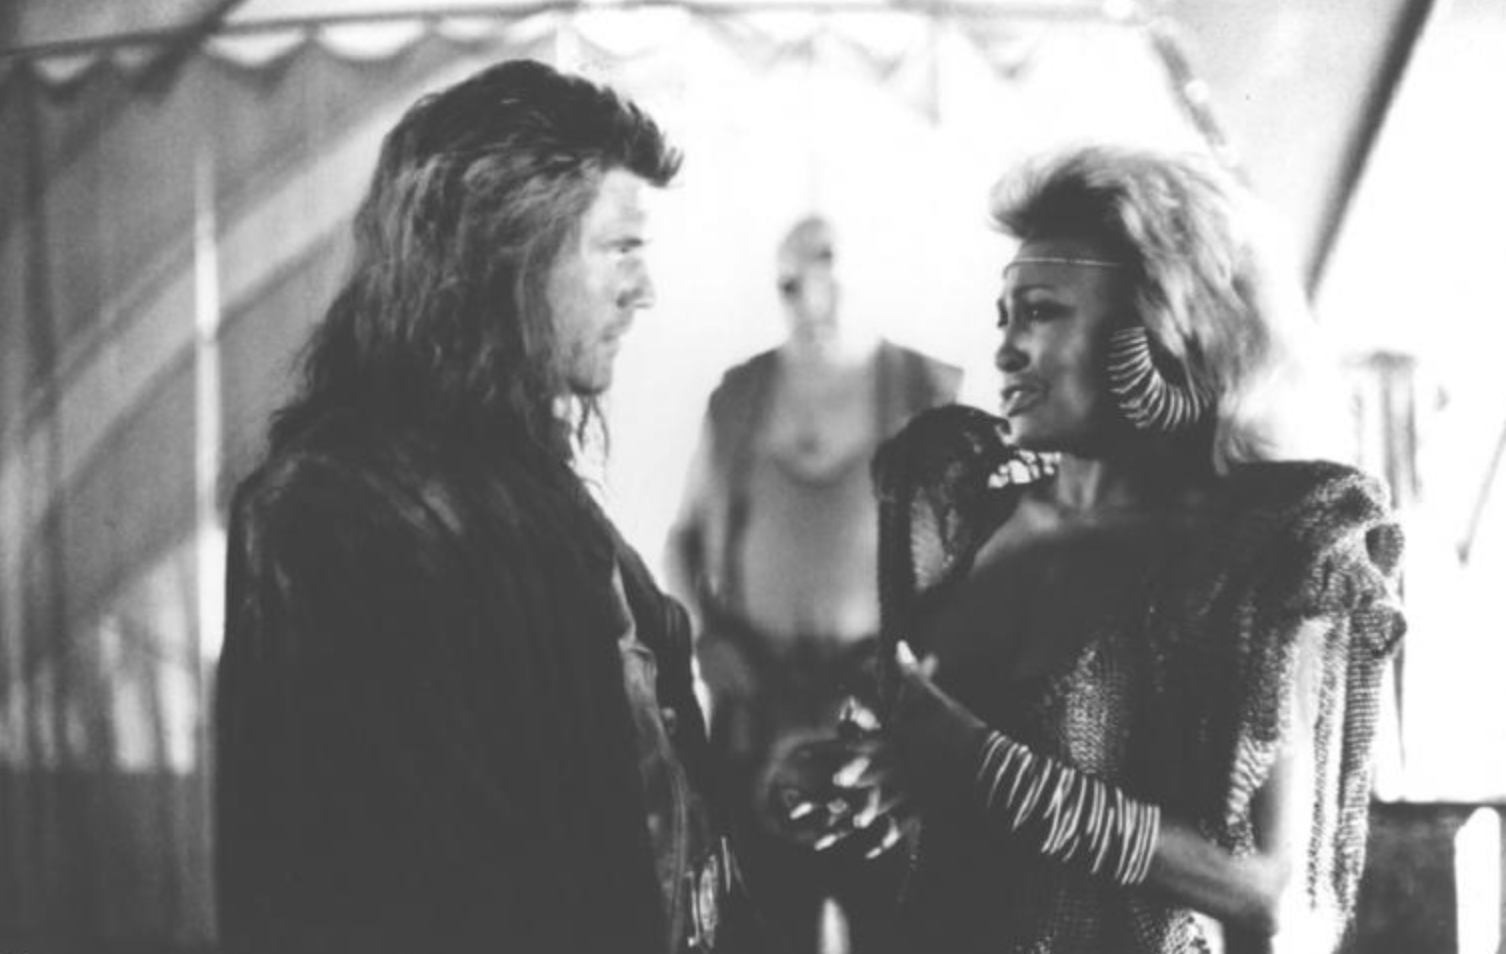 Behind the scenes of "Mad Max Beyond Thunderdome", circa 1985